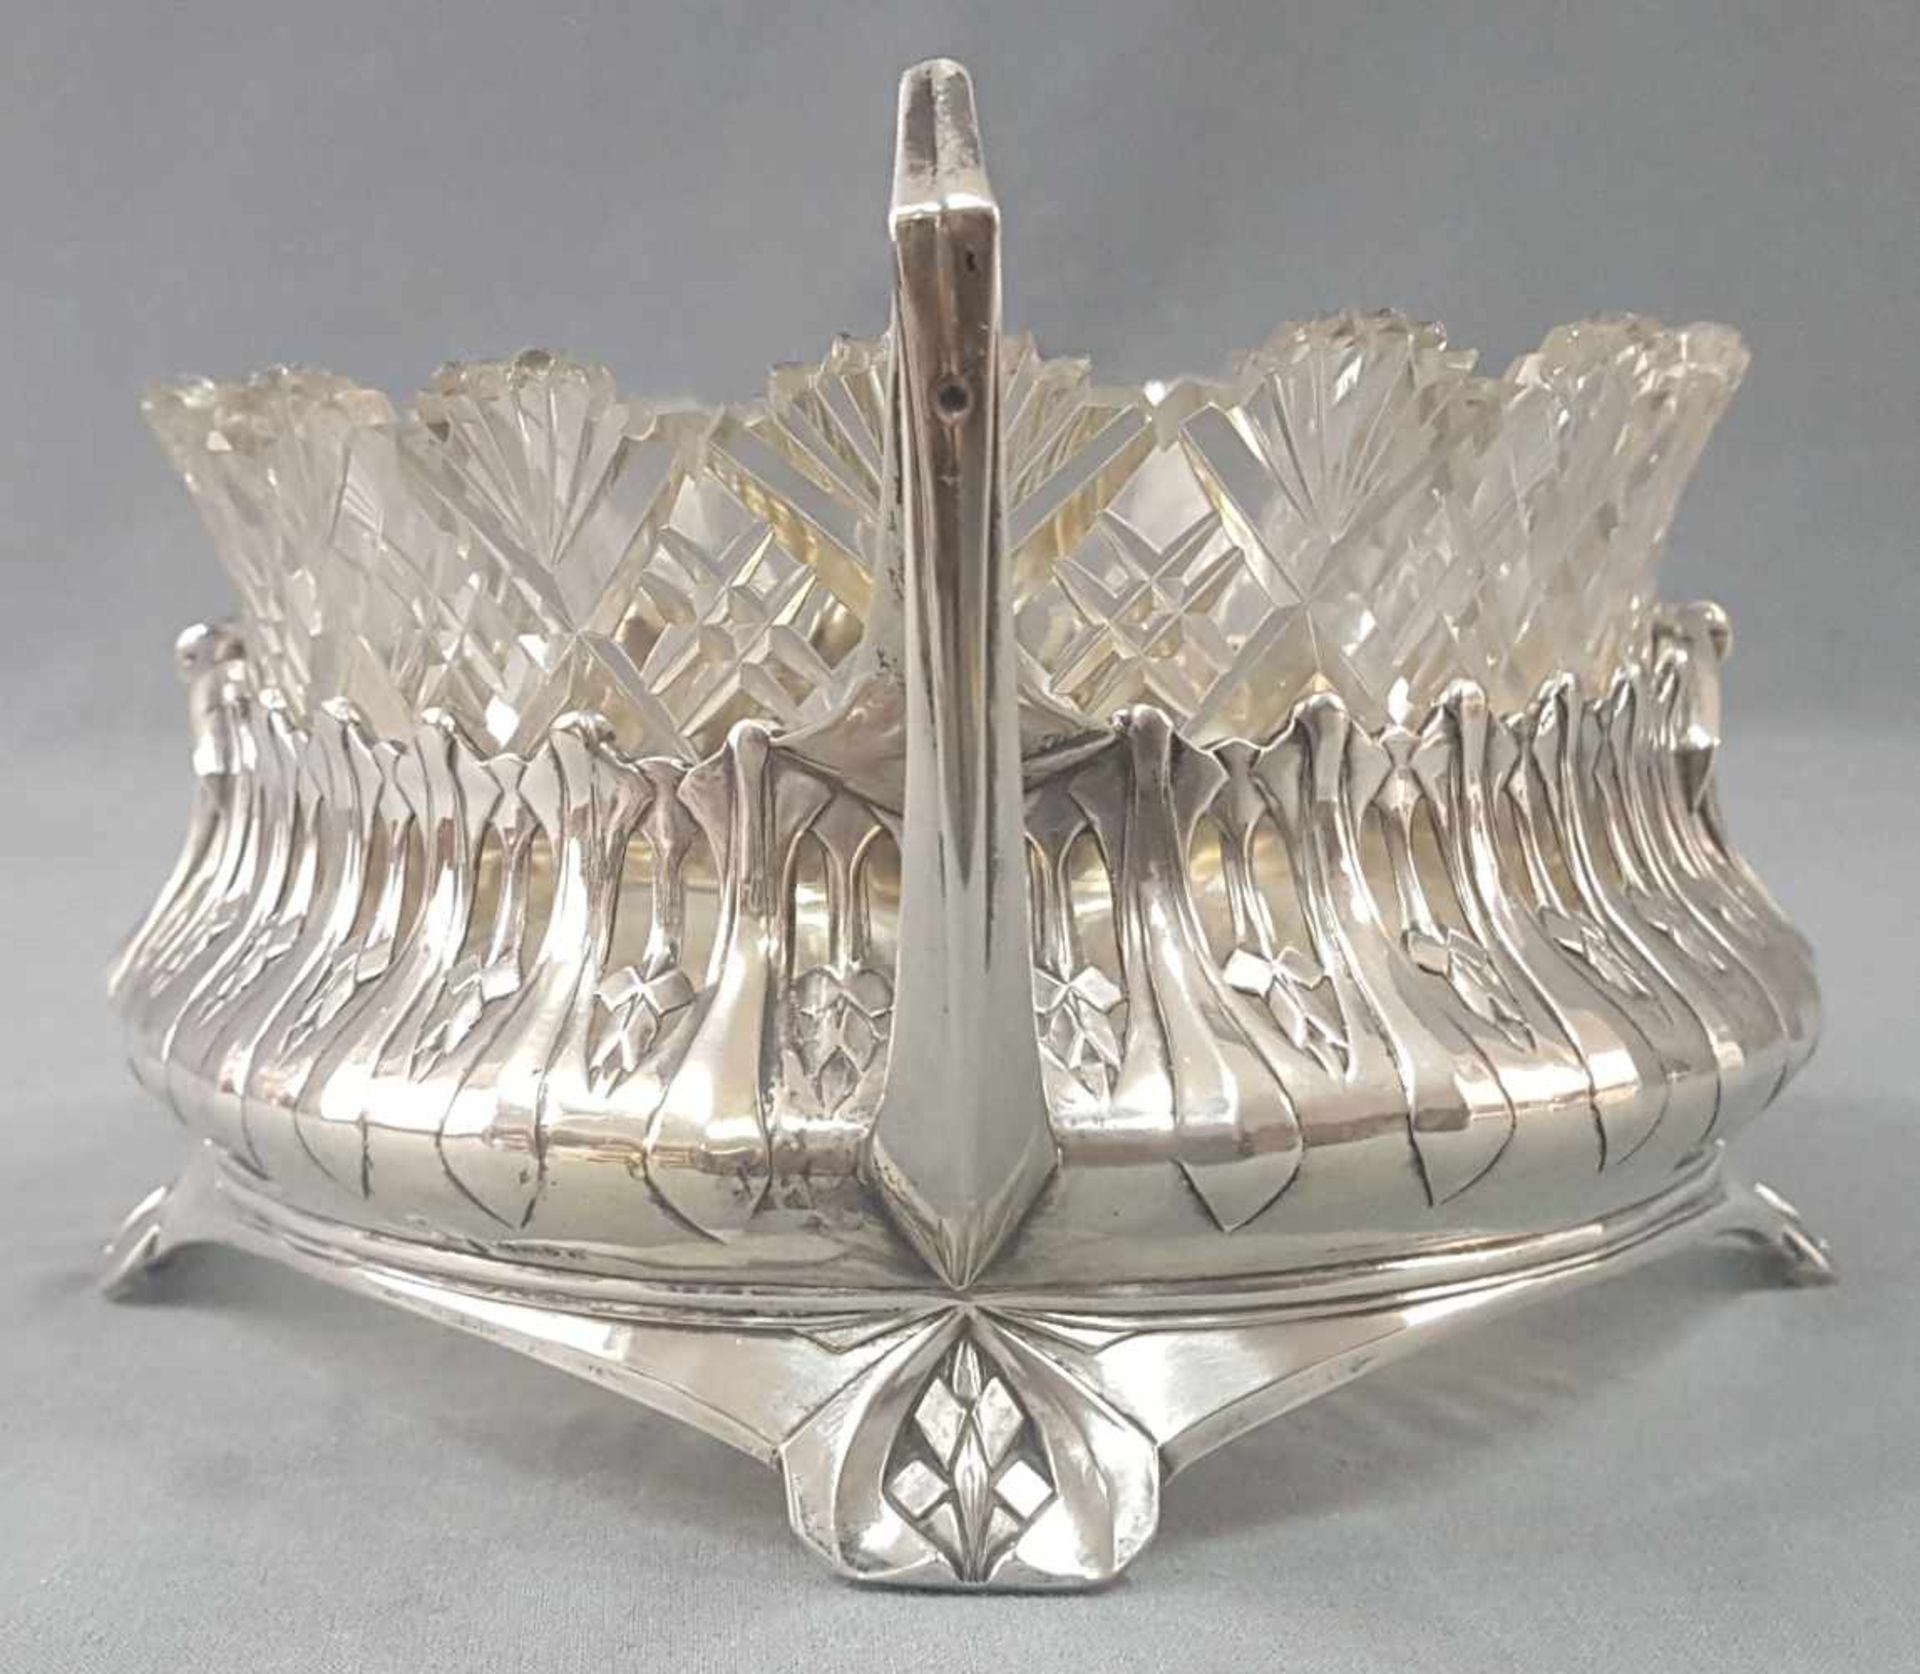 Jardiniere. Silver with original lead crystal glas insert. - Image 5 of 12